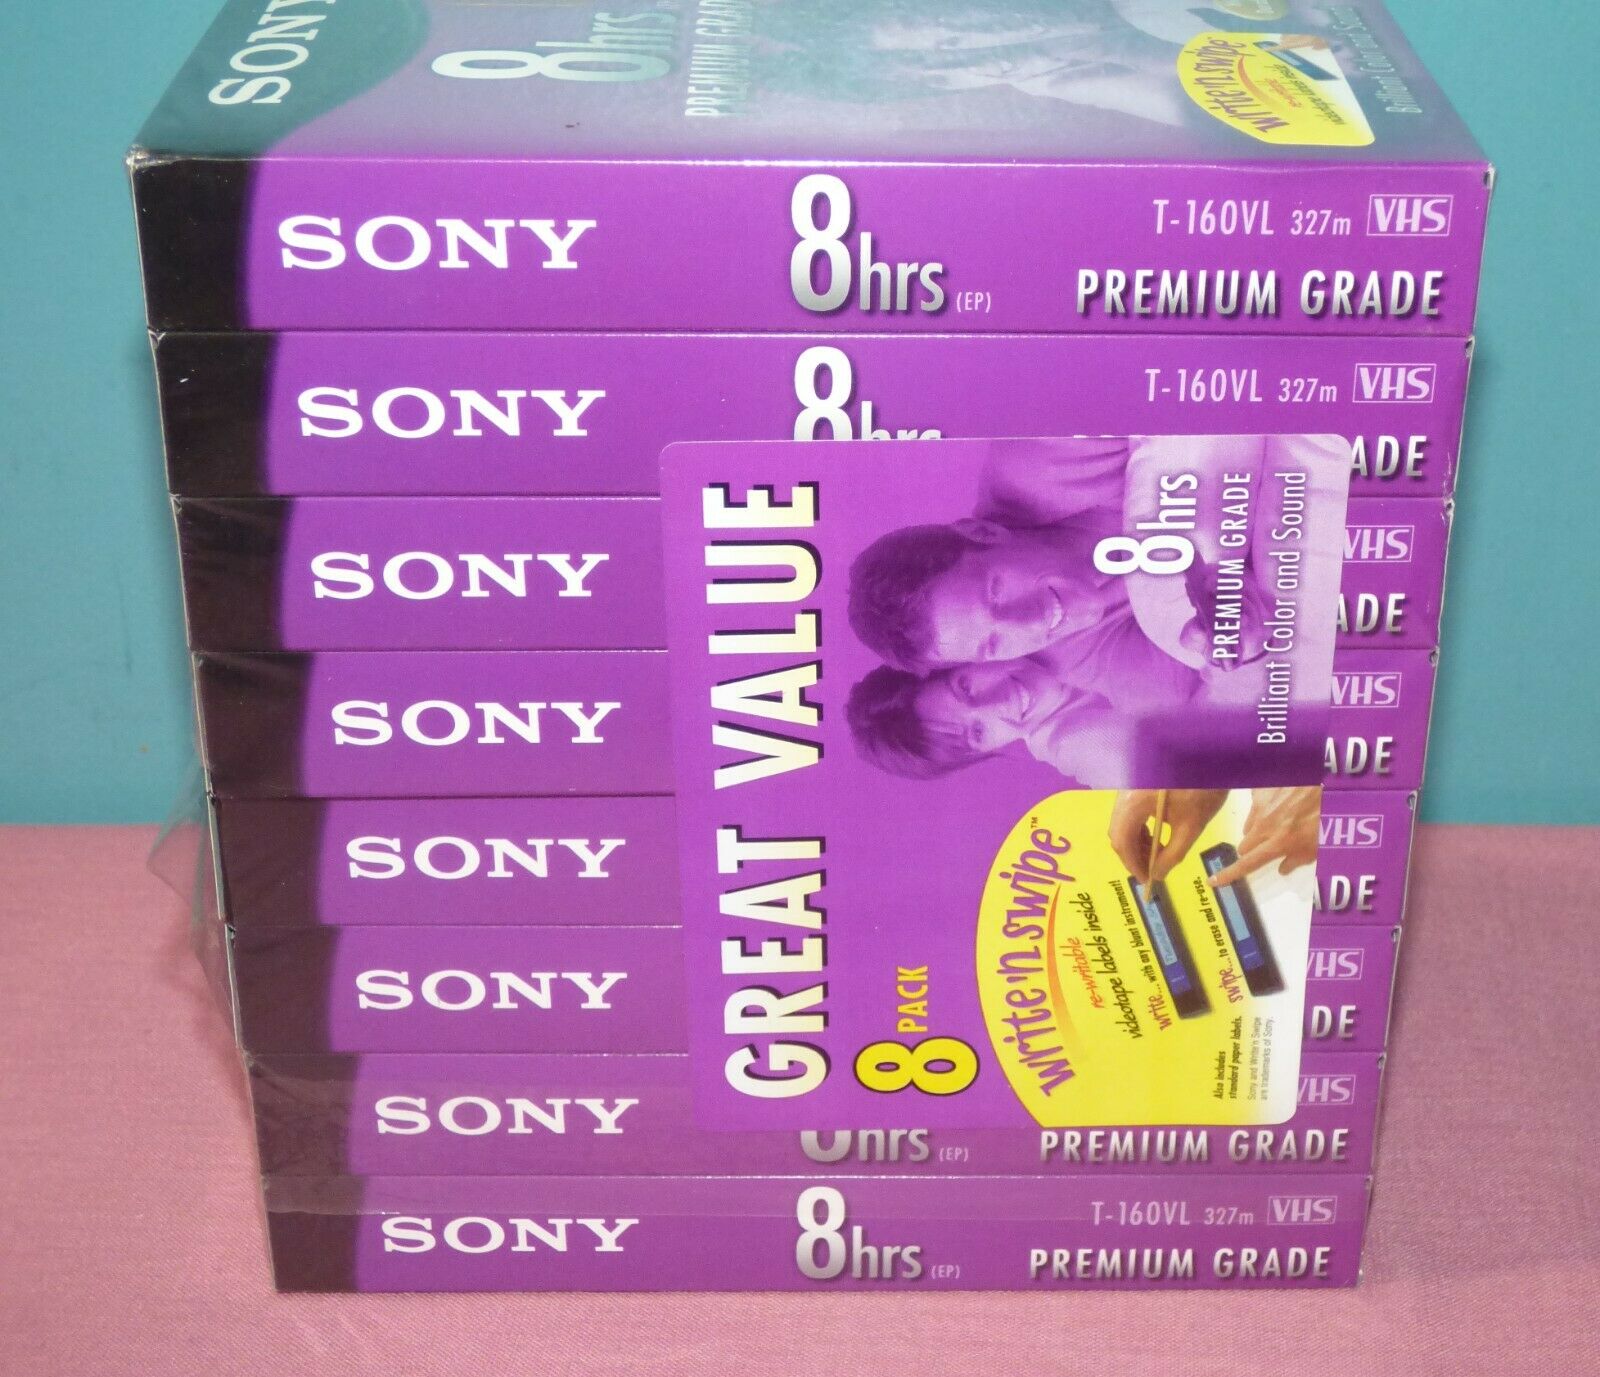 Sony T-160vl 8hrs Premium Grade Vhs Vcr Video Tapes New, Sealed 8 Pack